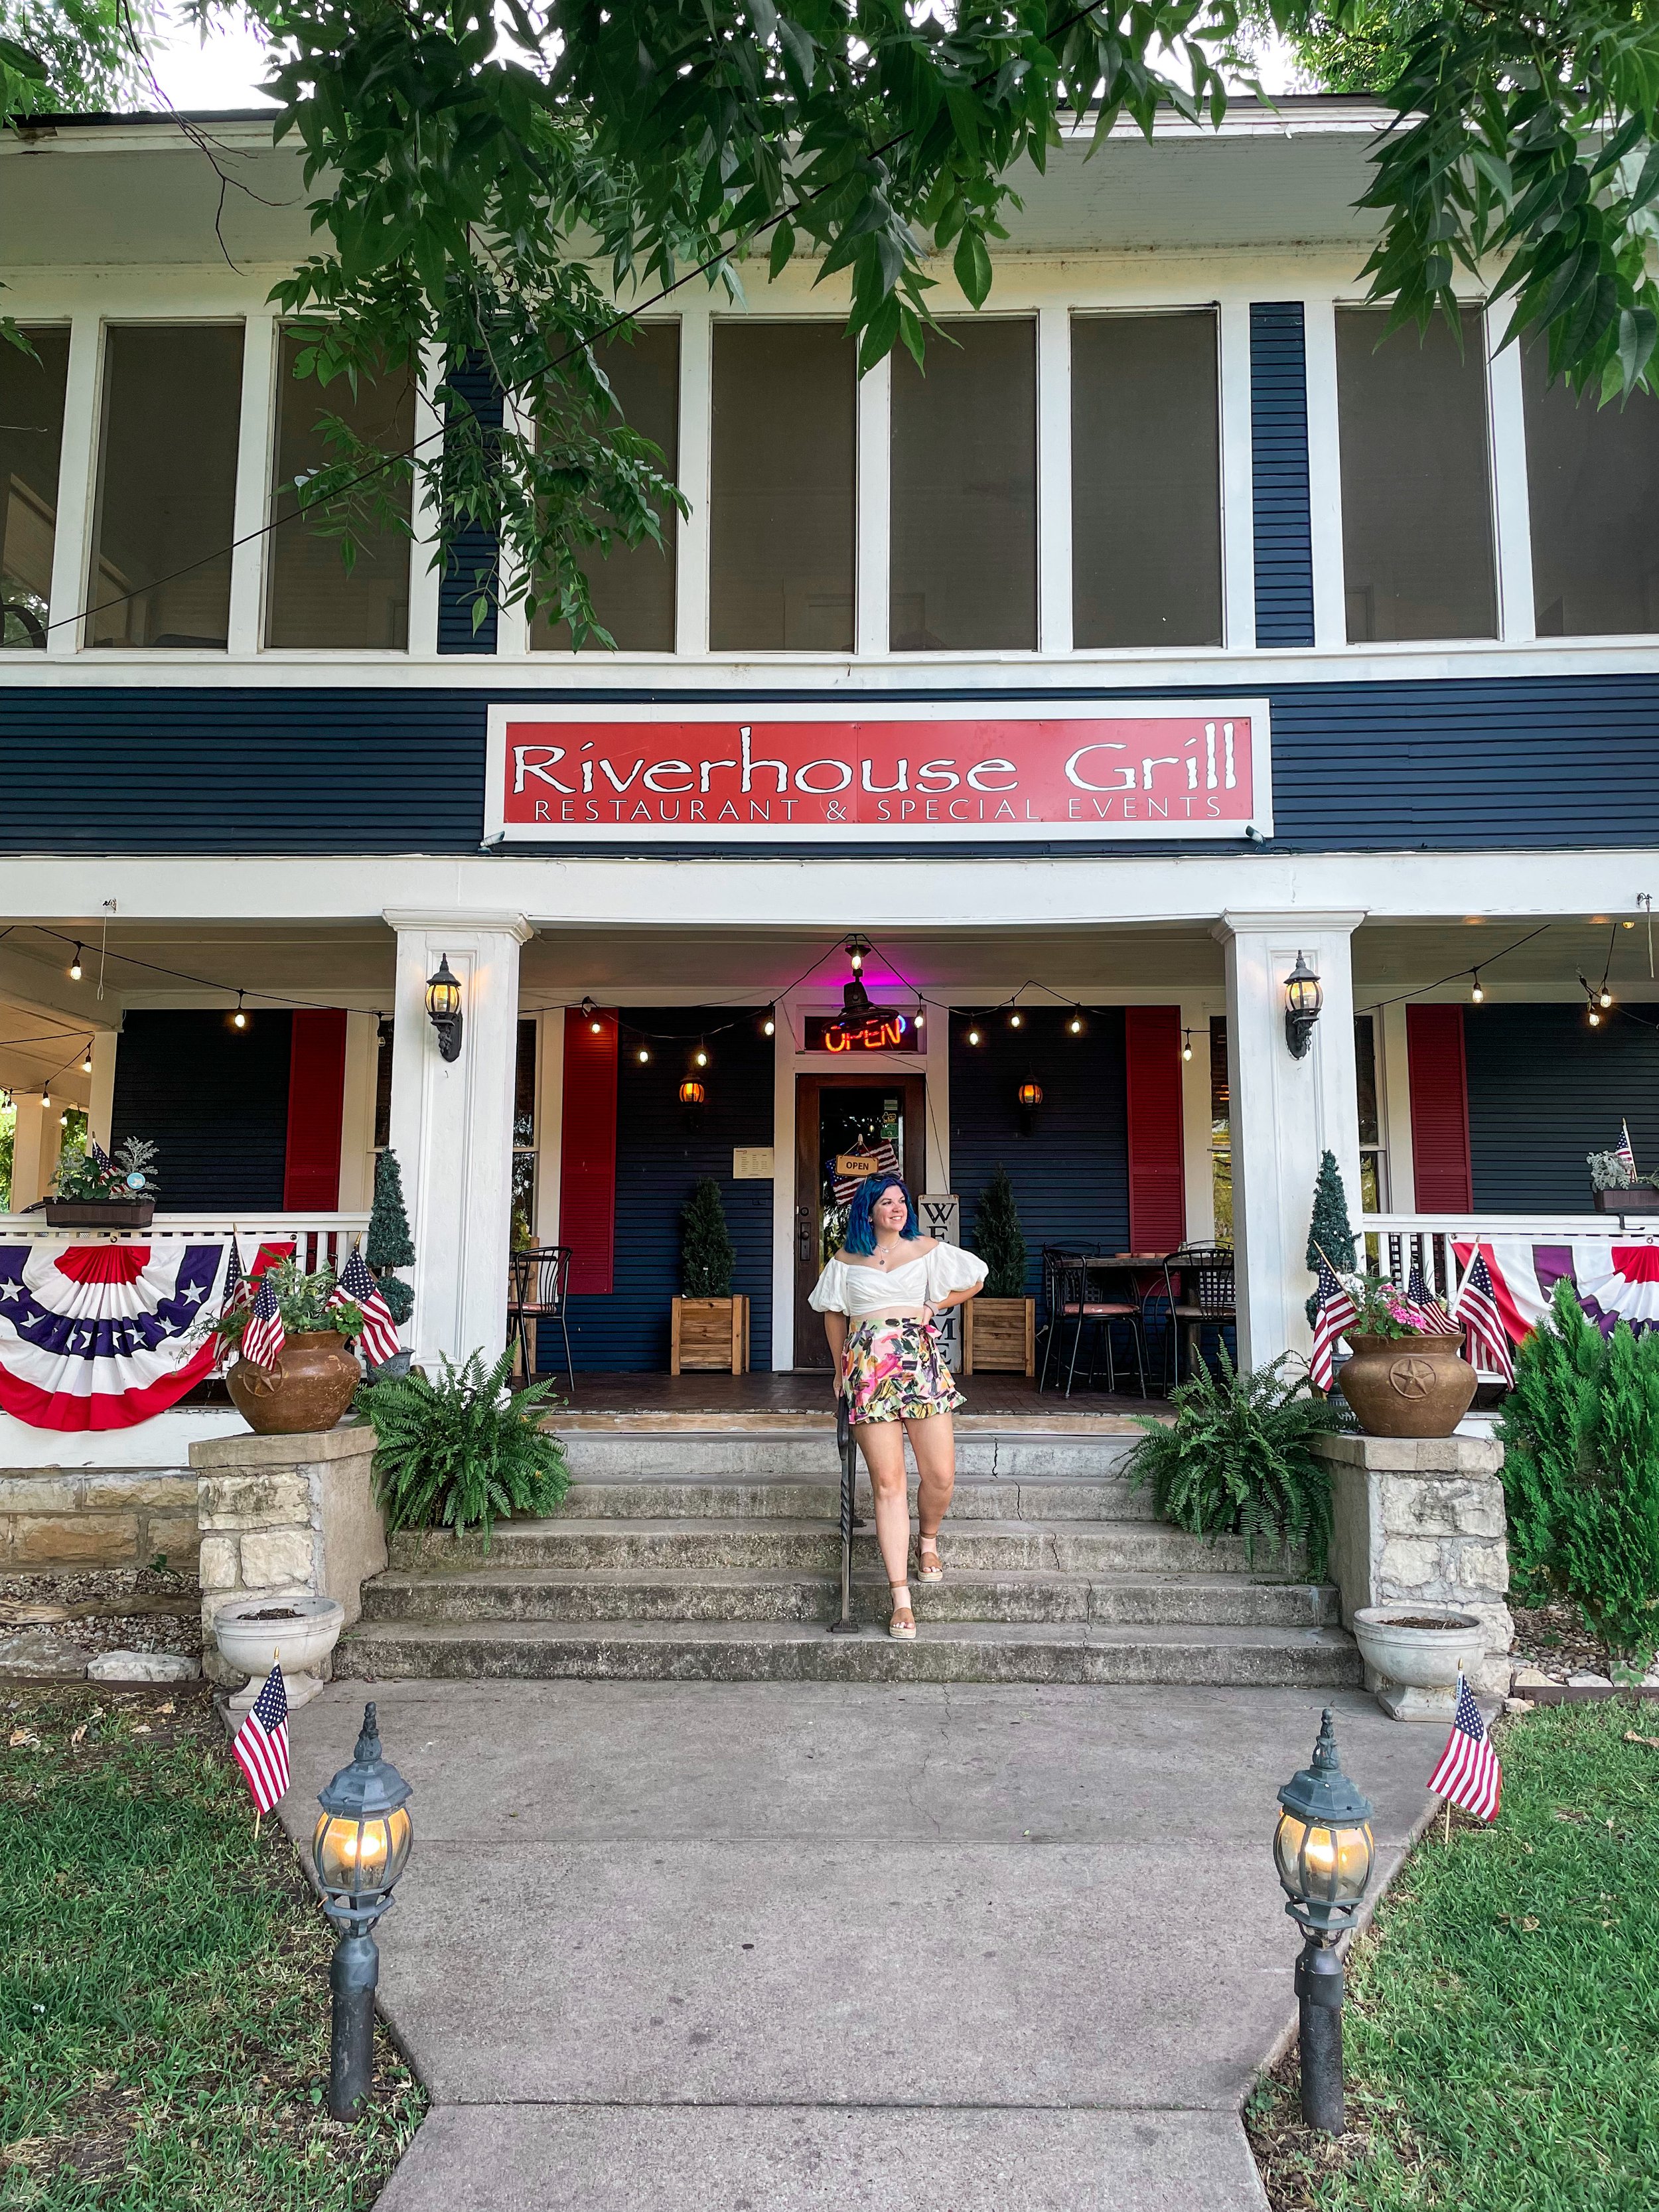 Riverhouse Grill at Glen Rose, Texas